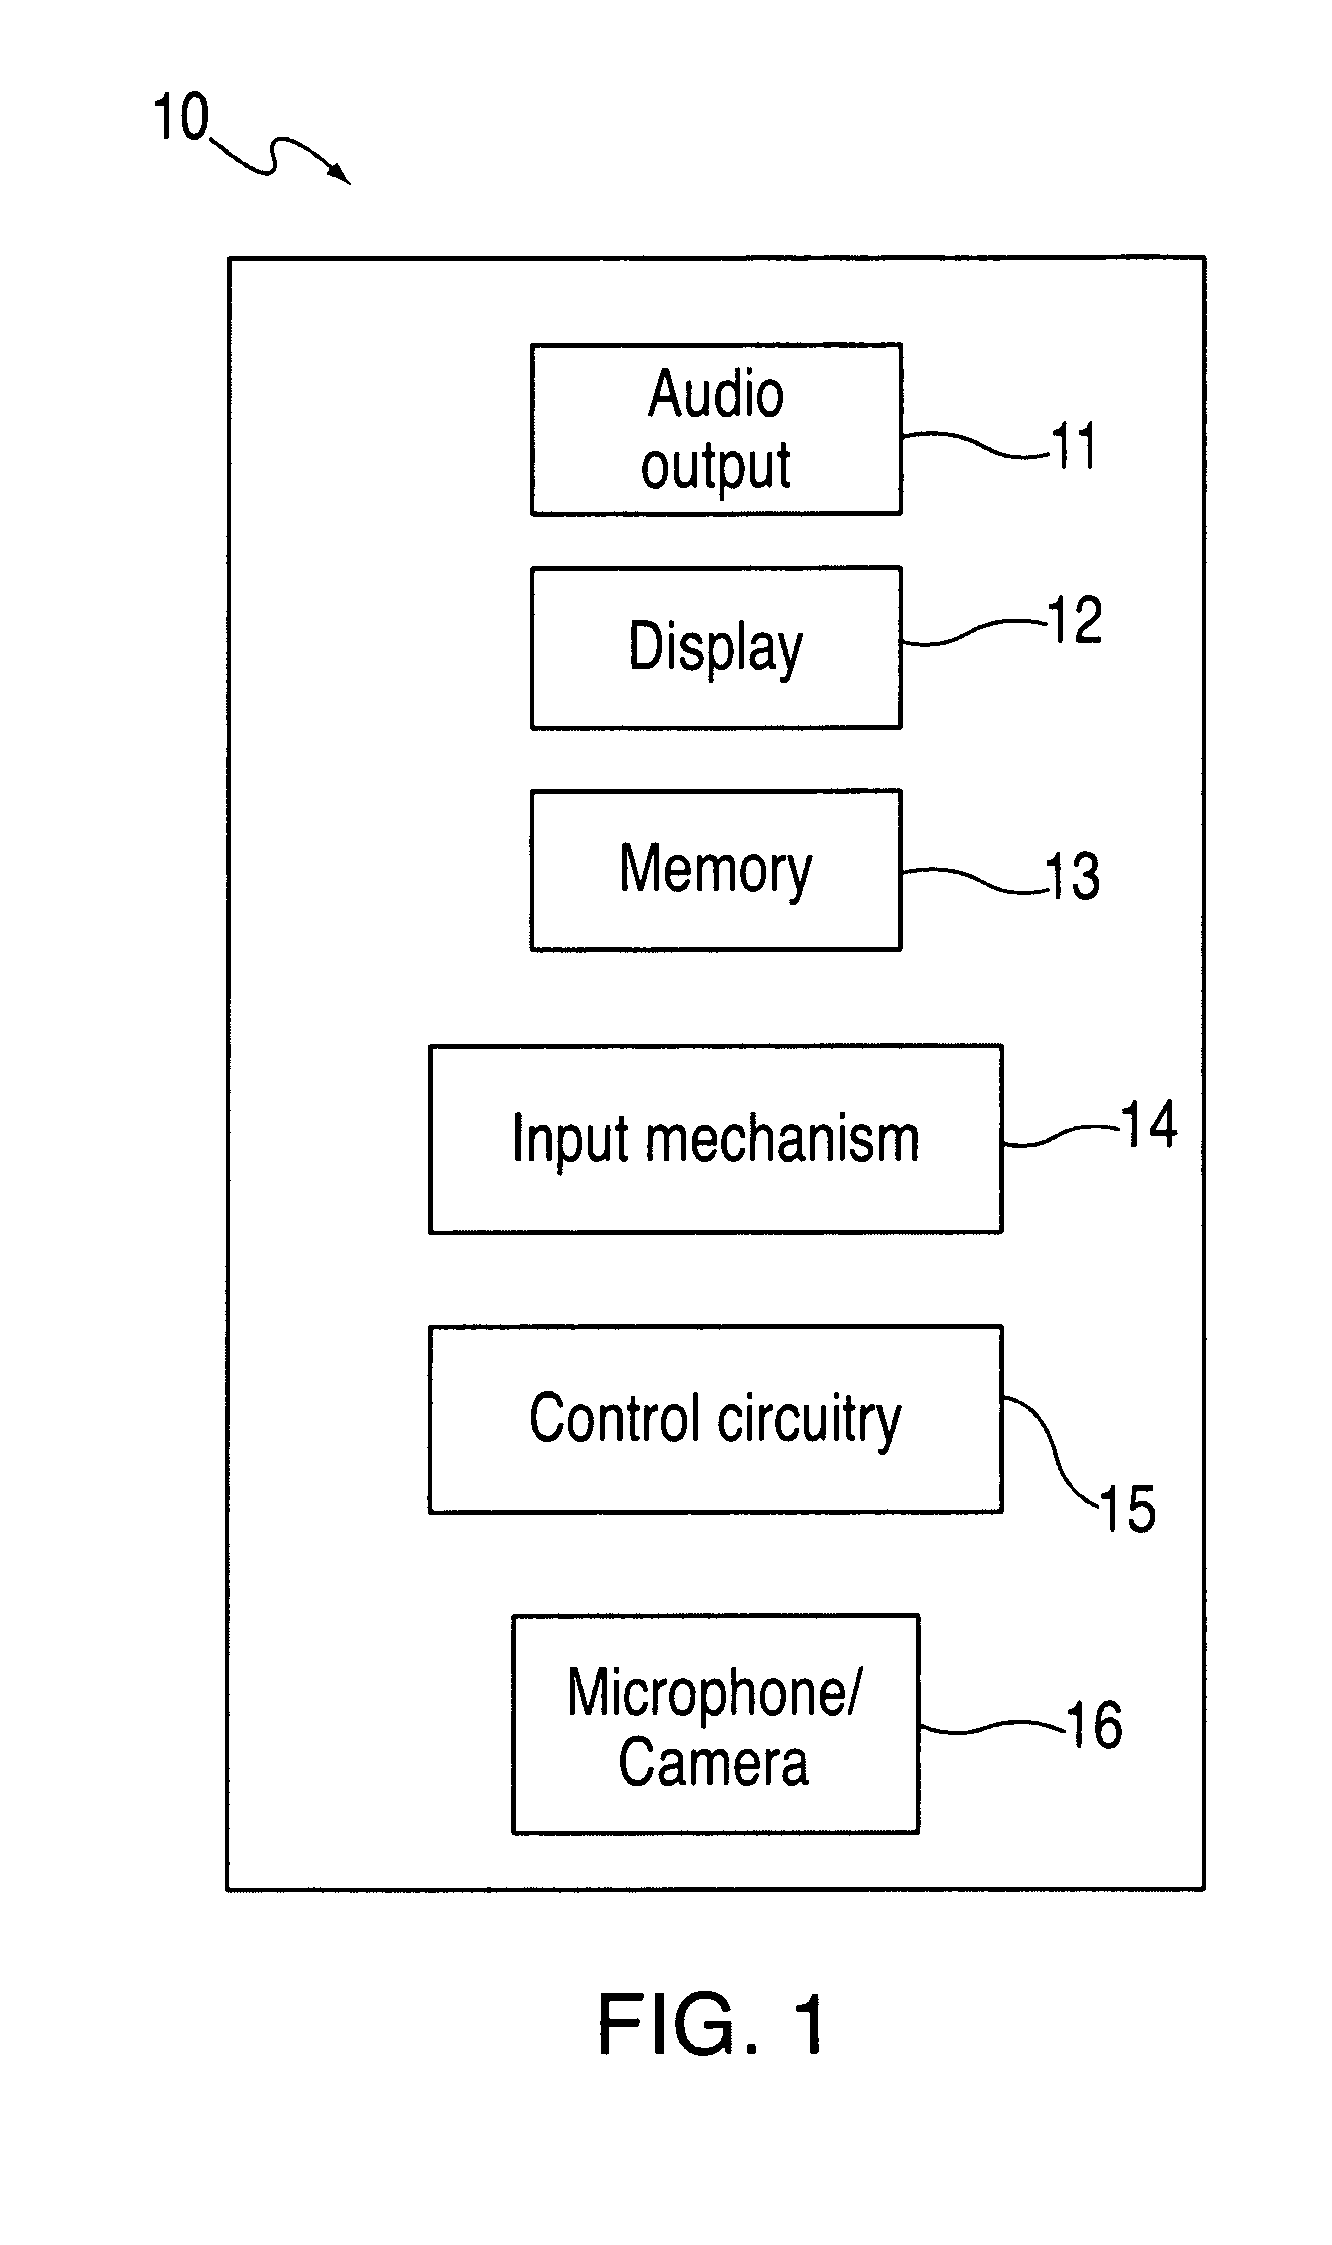 Method and apparatus for providing seamless resumption of video playback